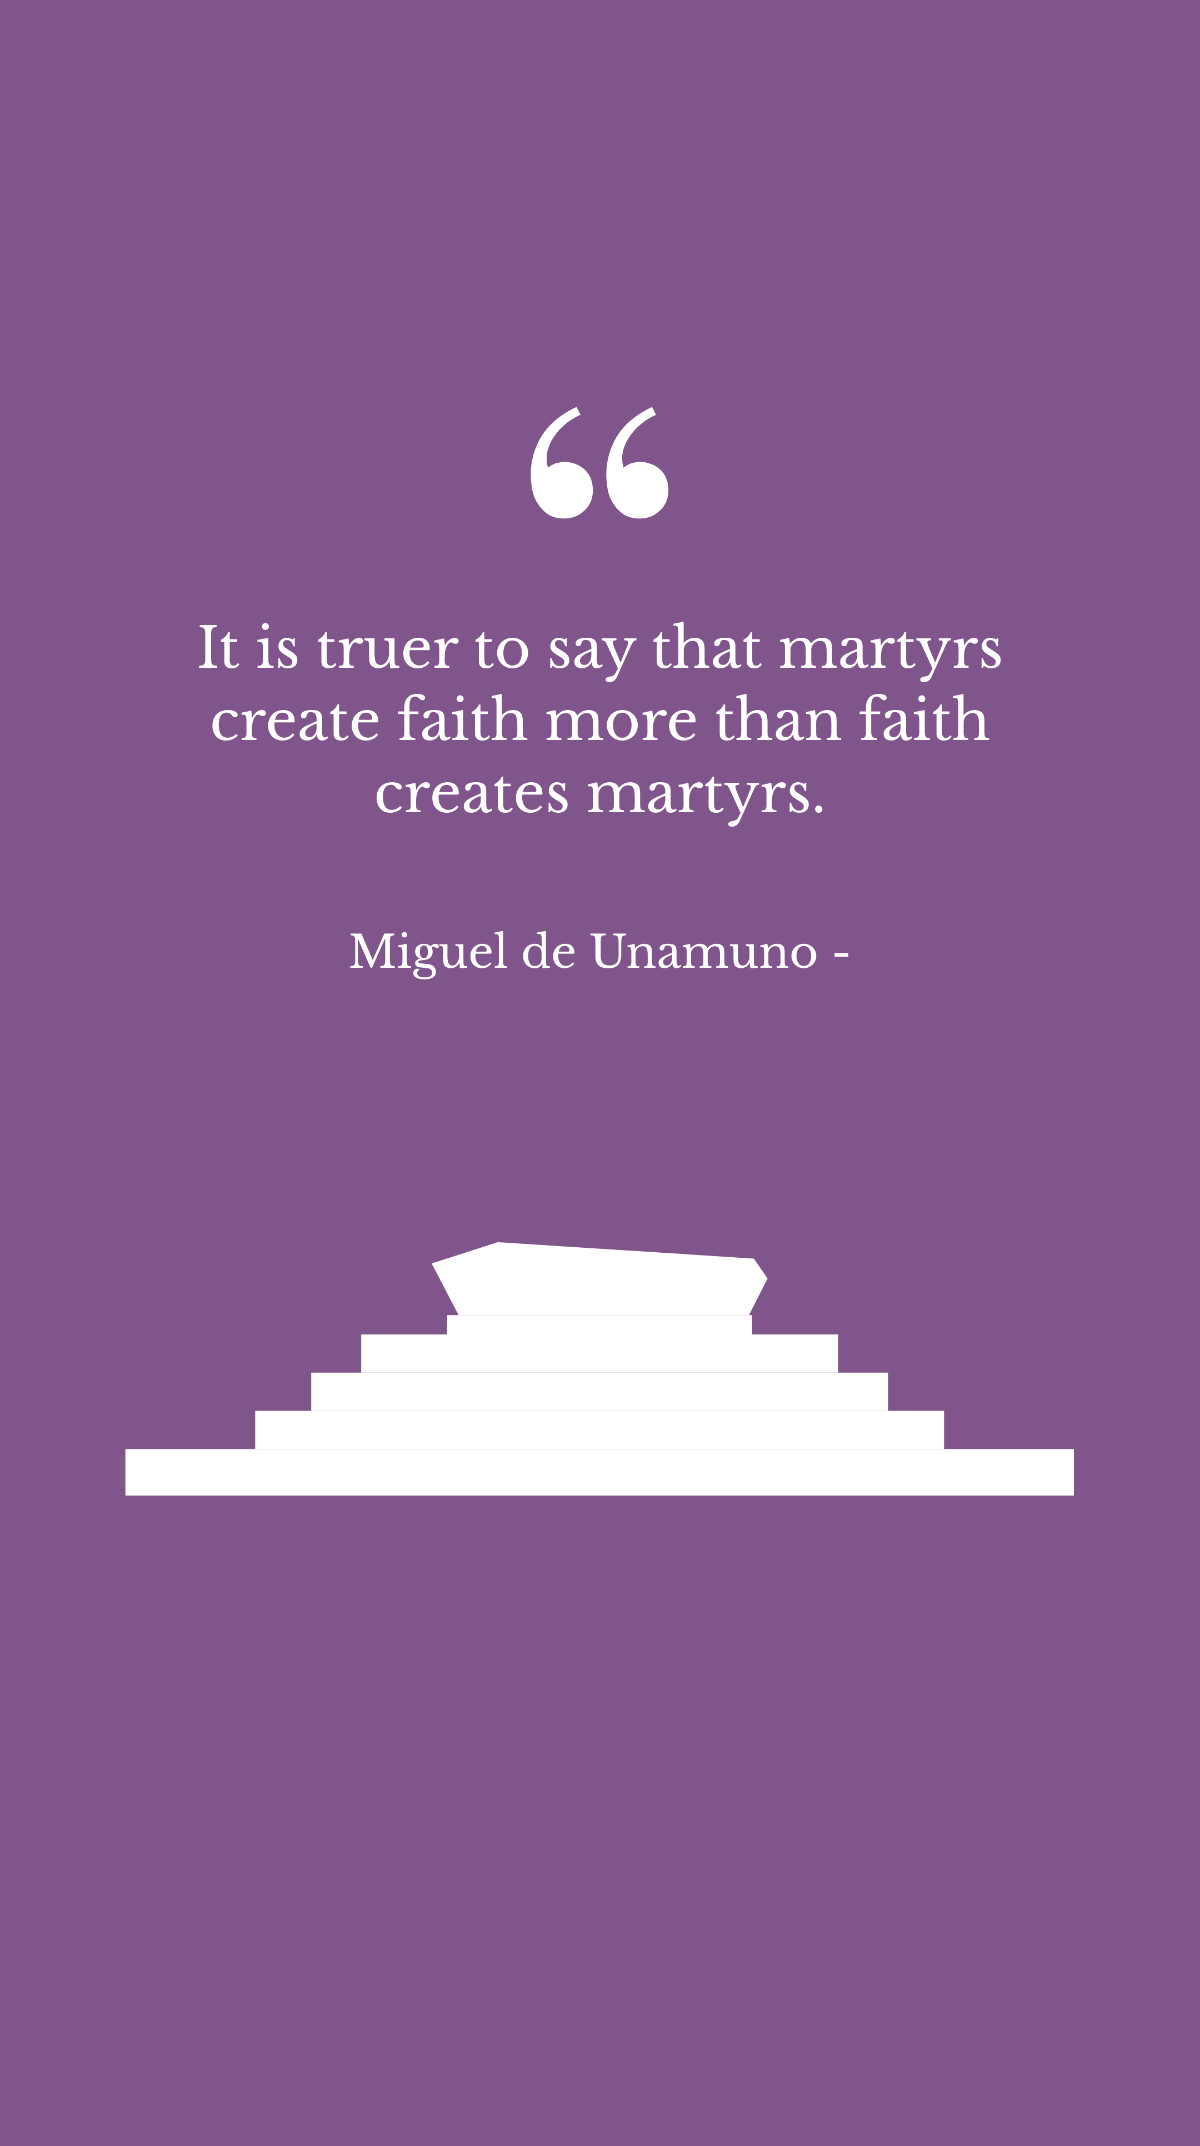 Miguel de Unamuno - It is truer to say that martyrs create faith more than faith creates martyrs. Template